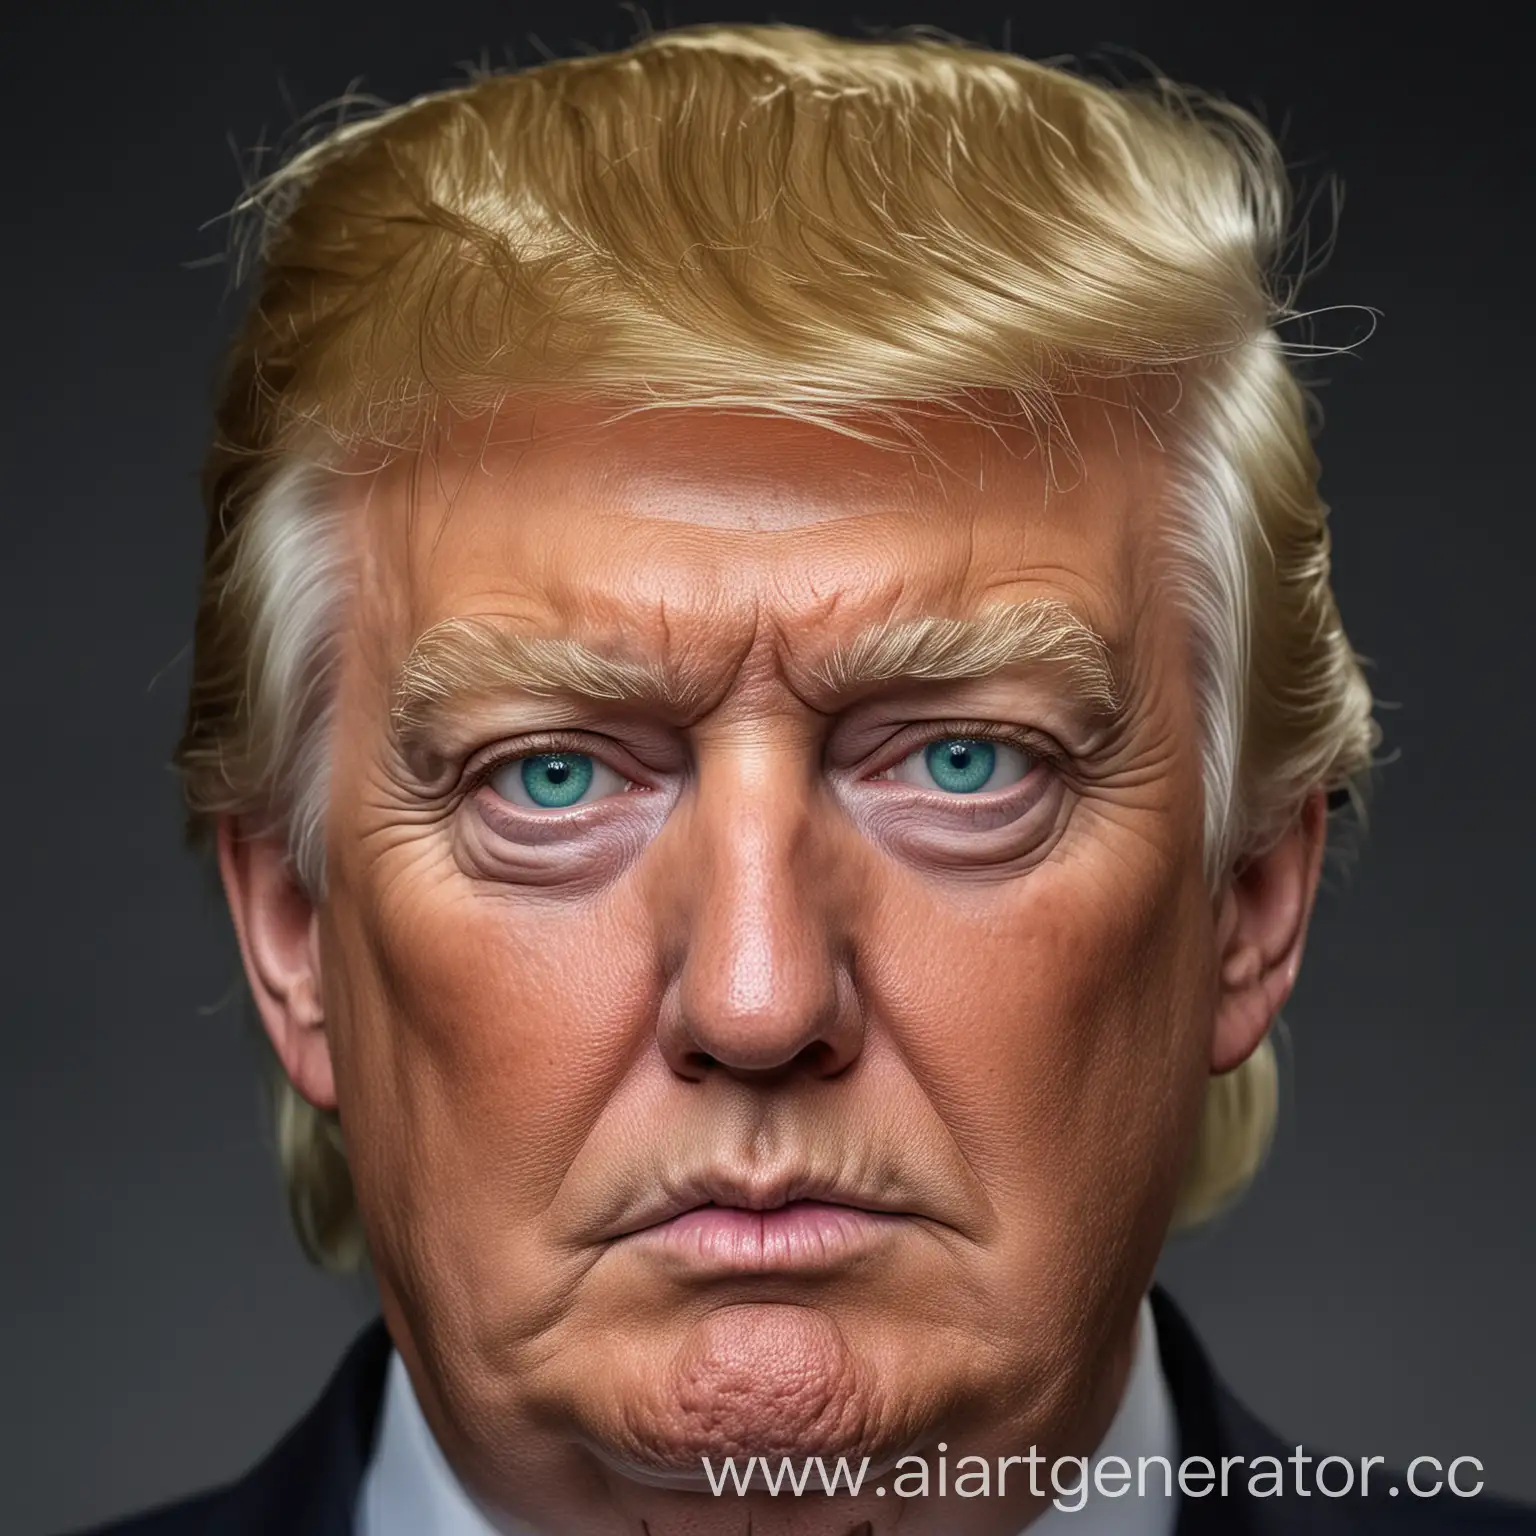 65YearOld-Donald-Trump-Portrait-with-Striking-Green-Hair-and-Piercing-Blue-Eyes